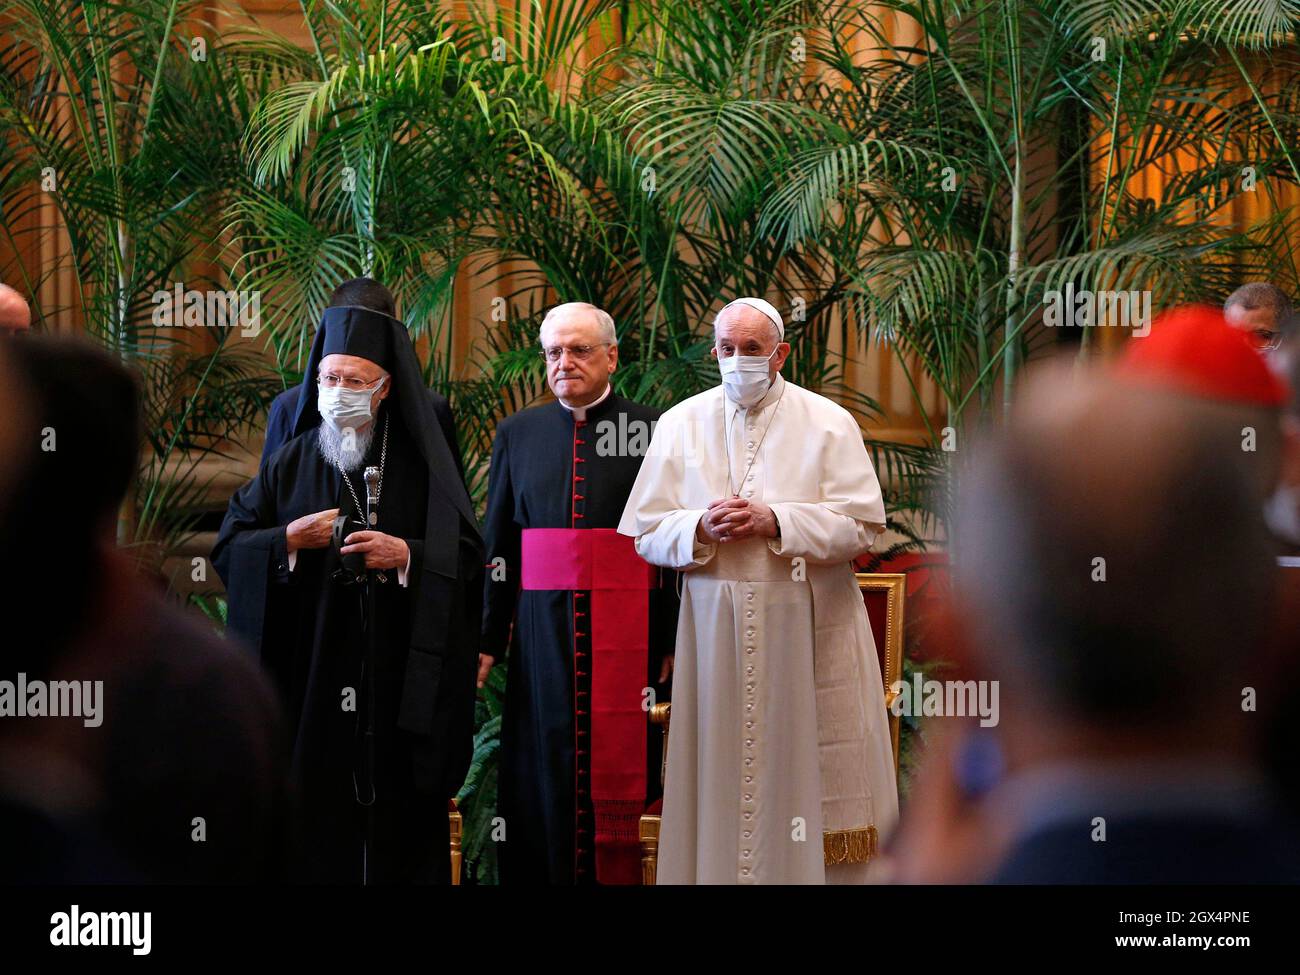 Vatican. 04th Oct, 2021. Pope Francis and Orthodox Patriarch Bartholomew of Constantinople attend the meeting, Faith and Science: Towards COP26, with religious leaders in the Apostolic Palace at the Vatican Oct. 4, 2021. The meeting was part of the run-up to the U.N. Climate Change Conference, called COP26, in Glasgow, Scotland, Oct. 31 to Nov. 12, 2021. Credit: dpa picture alliance/Alamy Live News Stock Photo